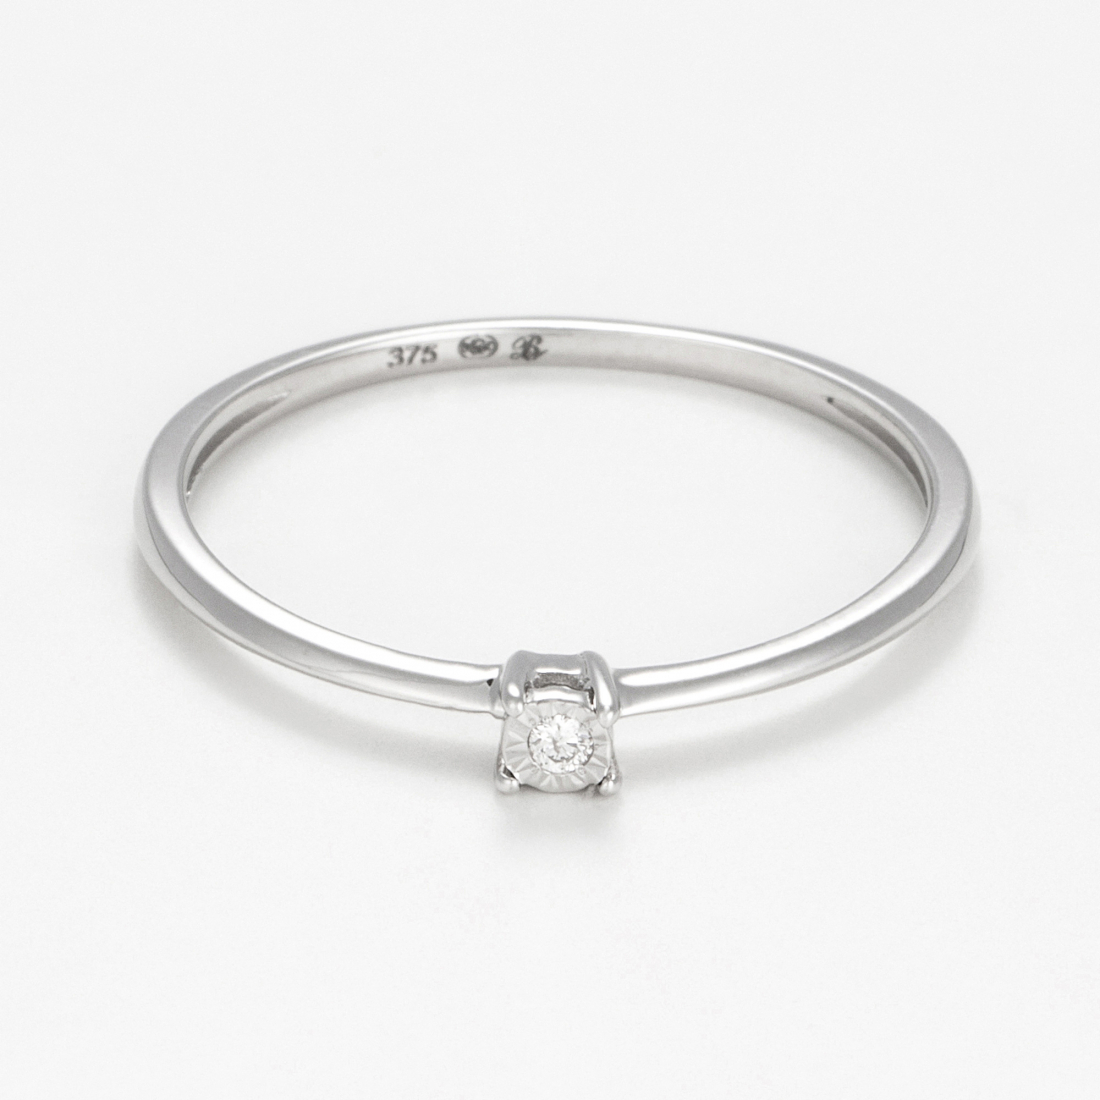 Women's 'Solitaire Pure' Ring